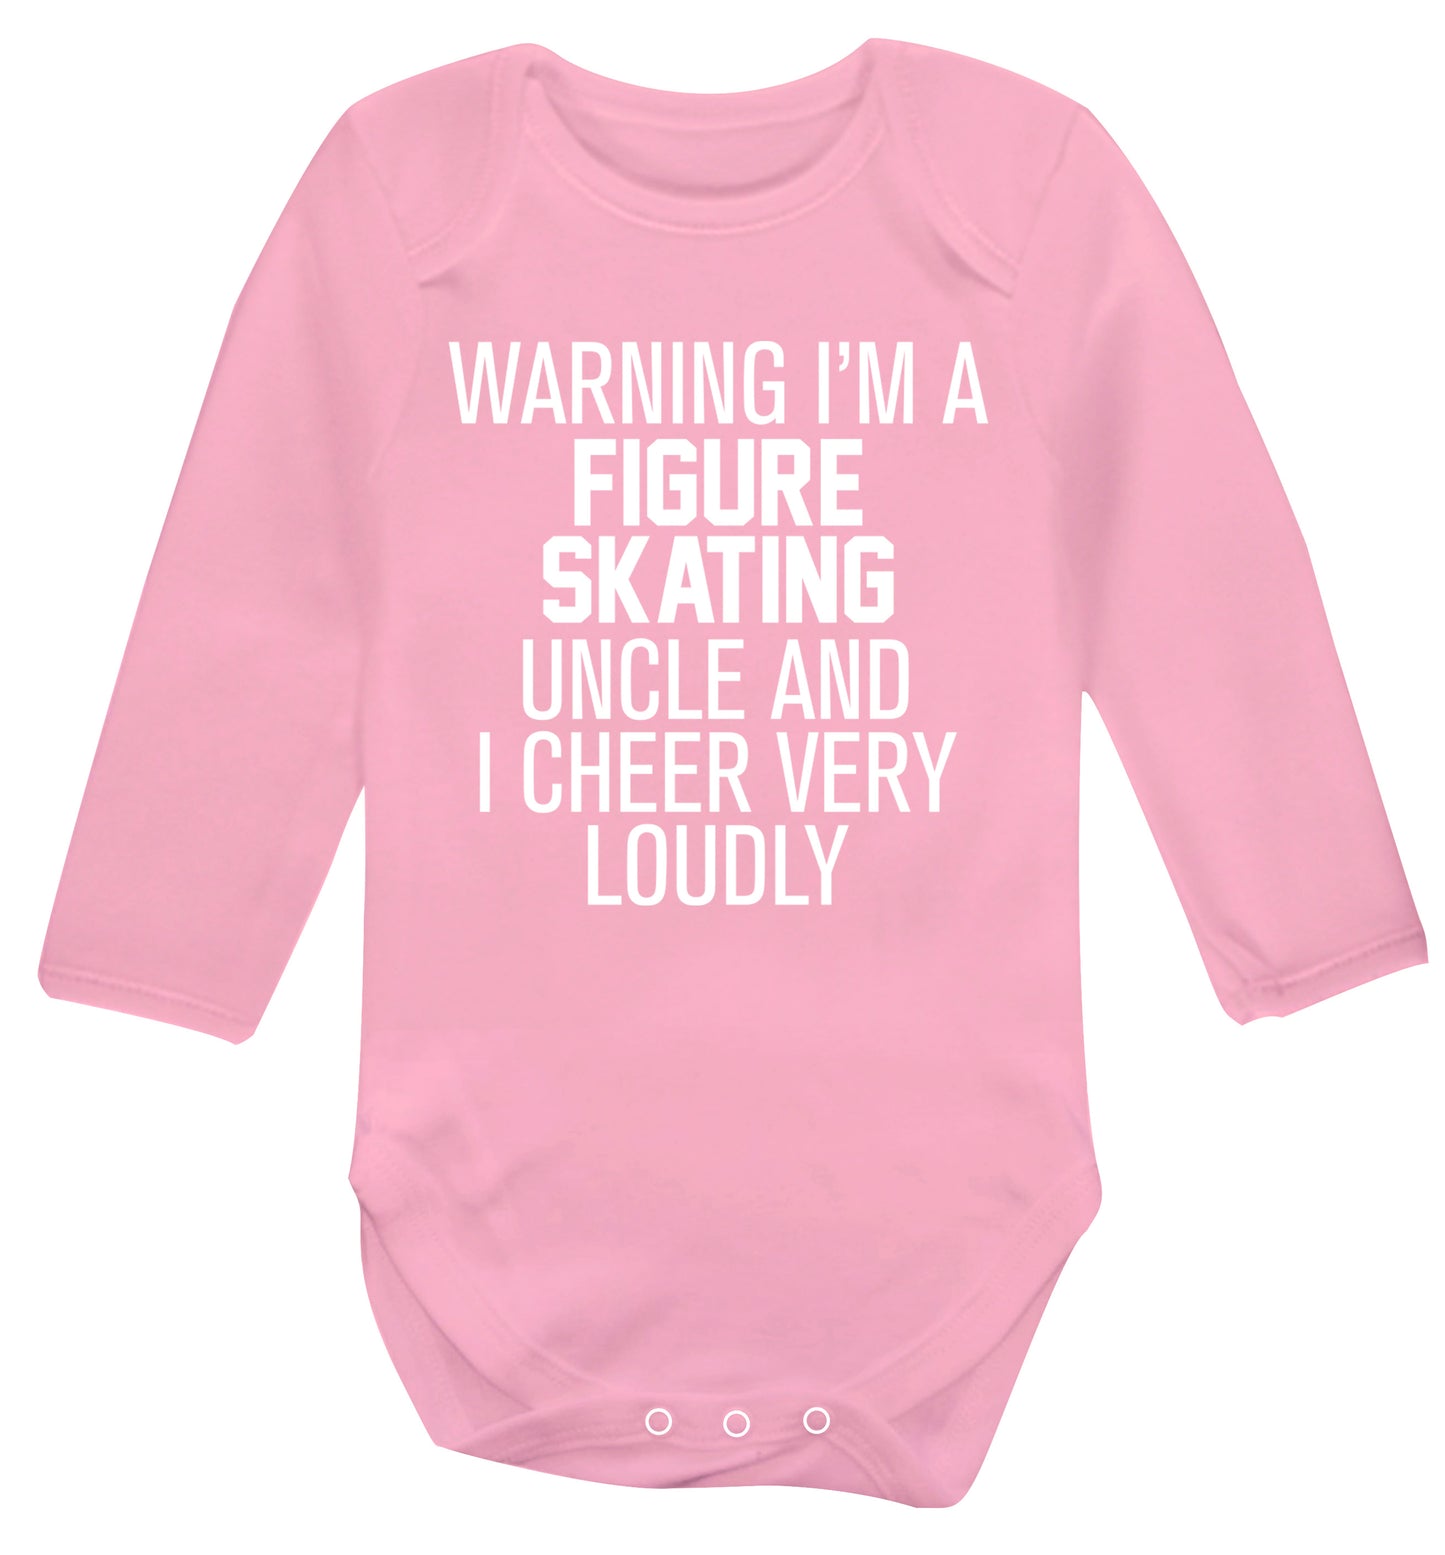 Warning I'm a figure skating uncle and I cheer very loudly Baby Vest long sleeved pale pink 6-12 months